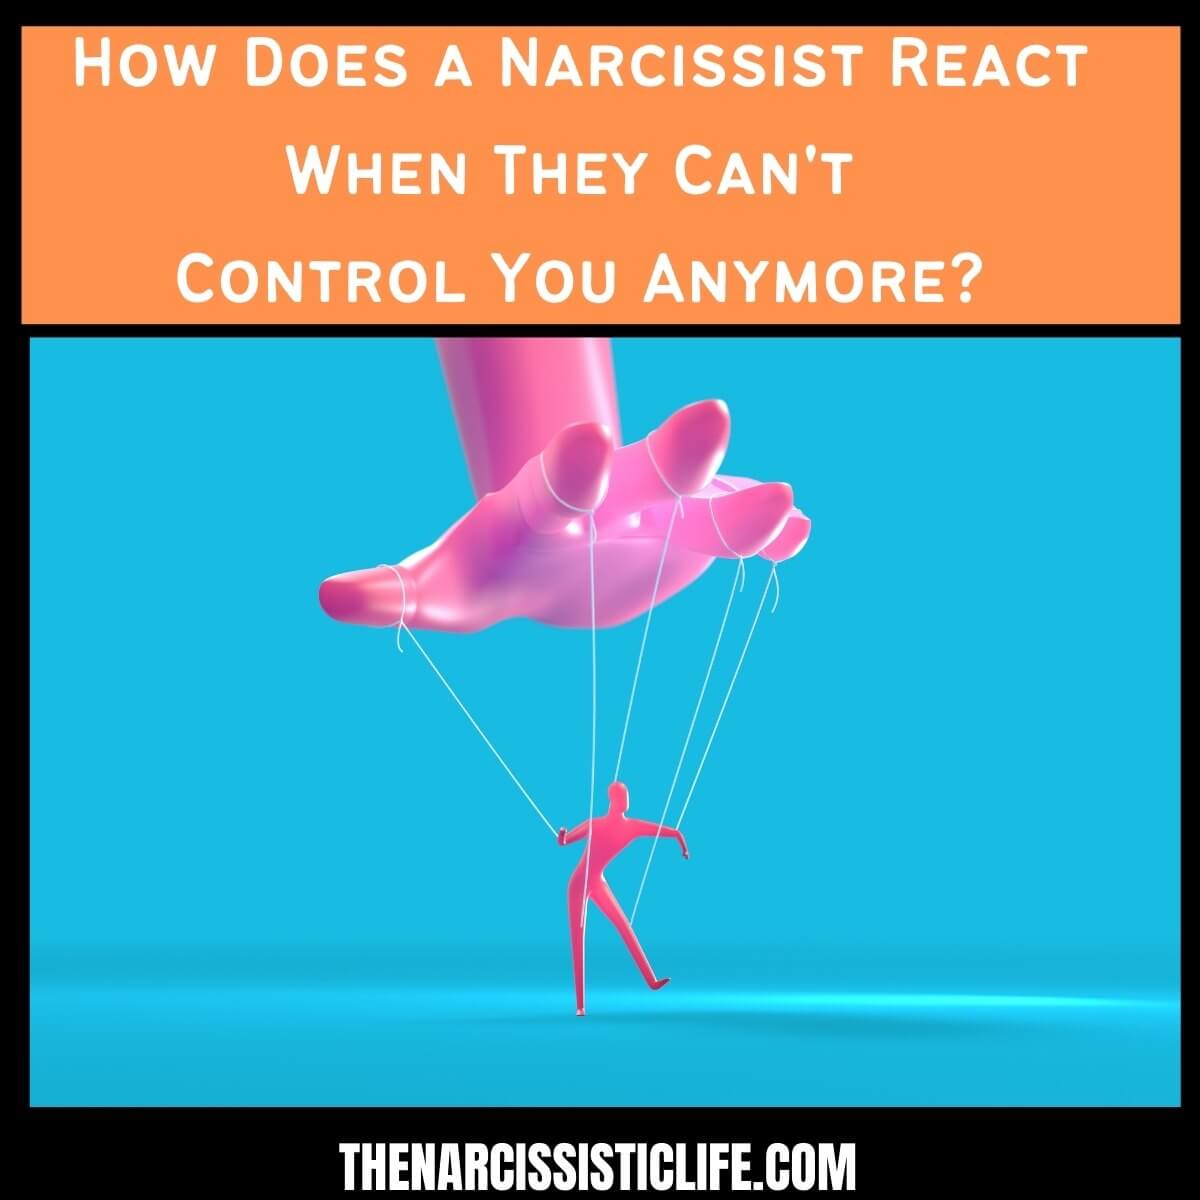 How Does a Narcissist React When They Can't Control You Anymore?